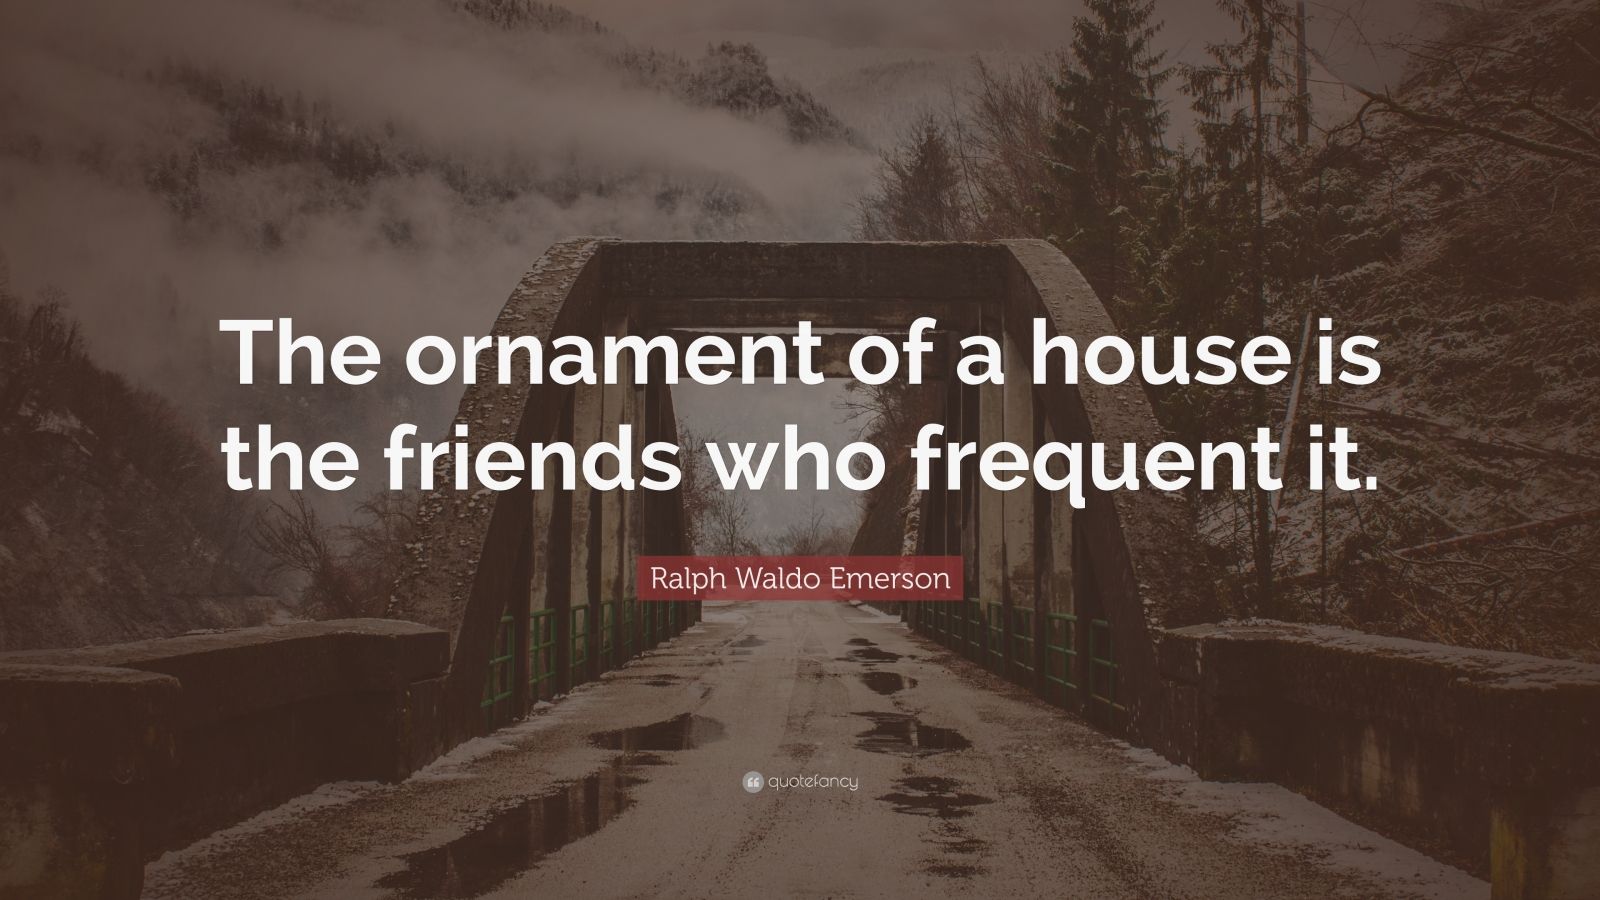 Ralph Waldo Emerson Quotes (100 wallpapers) - Quotefancy